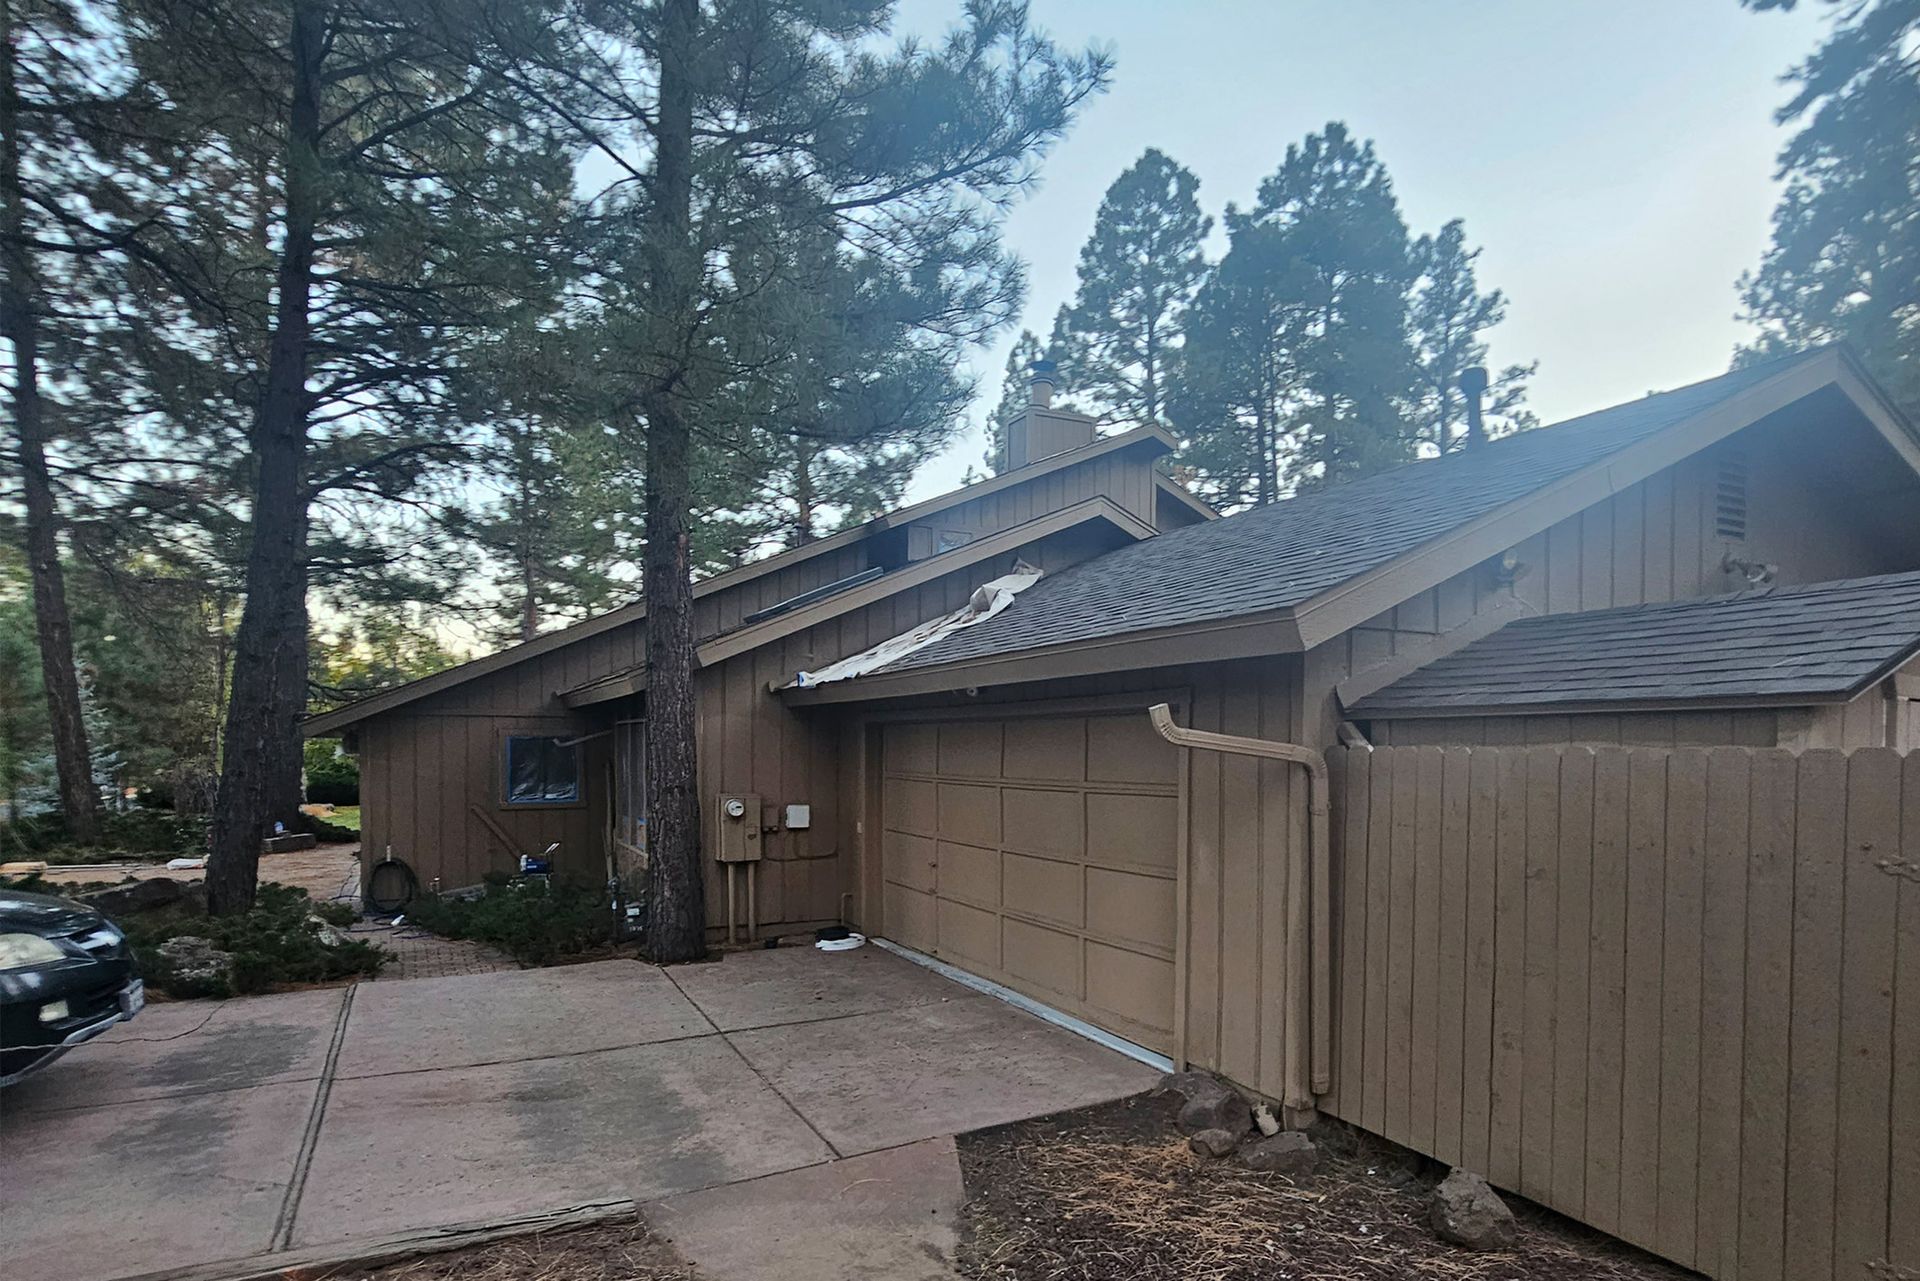 House With a Garage and a Car Parked — Flagstaff, AZ — Northern Arizona Building and Investments